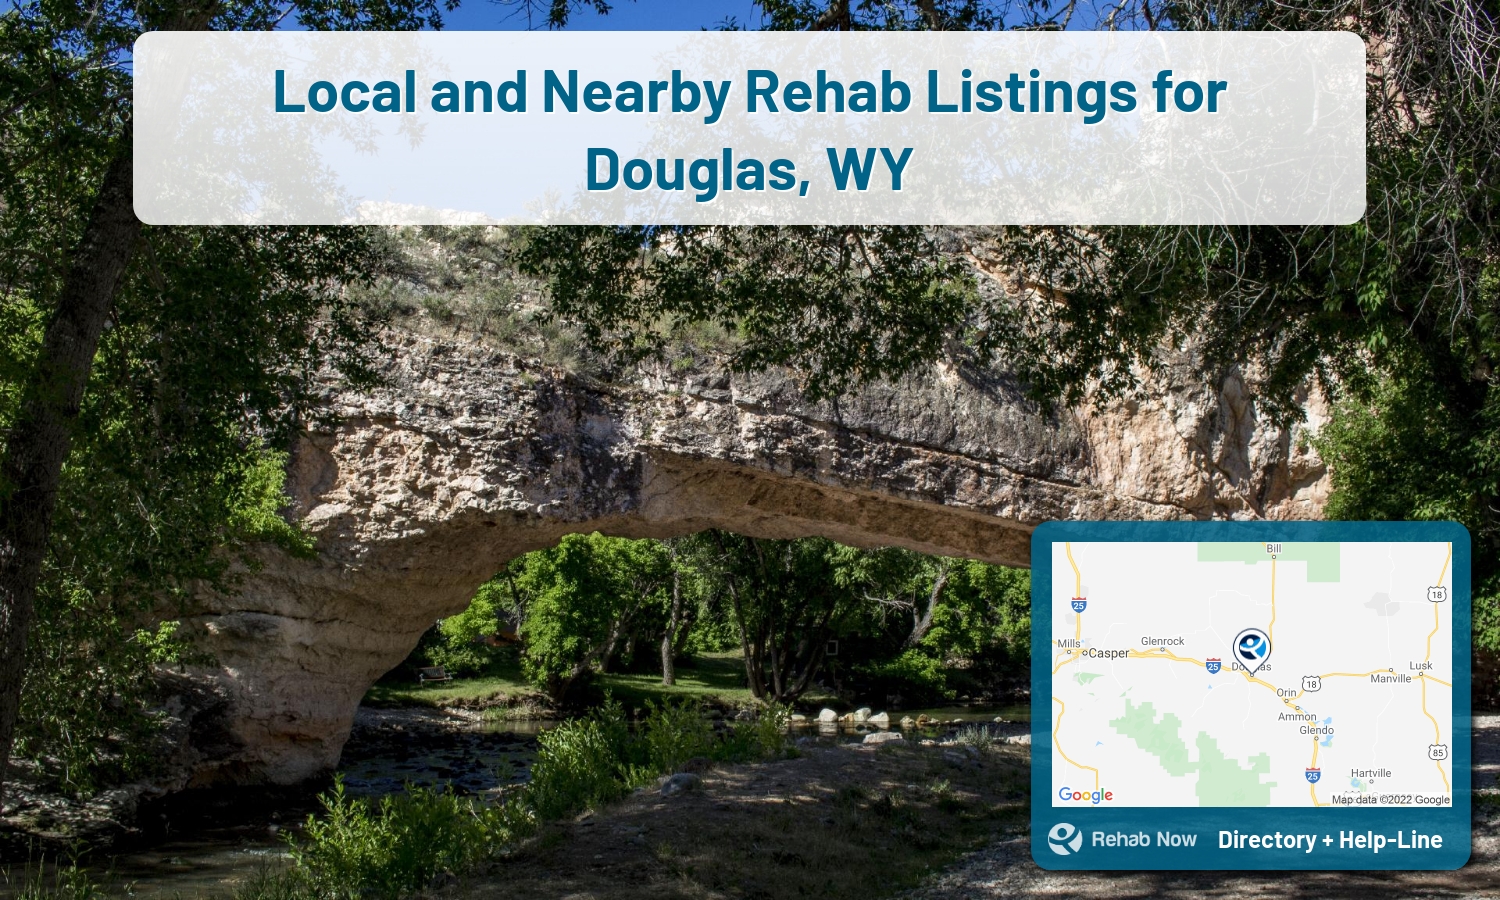 Douglas, WY Treatment Centers. Find drug rehab in Douglas, Wyoming, or detox and treatment programs. Get the right help now!